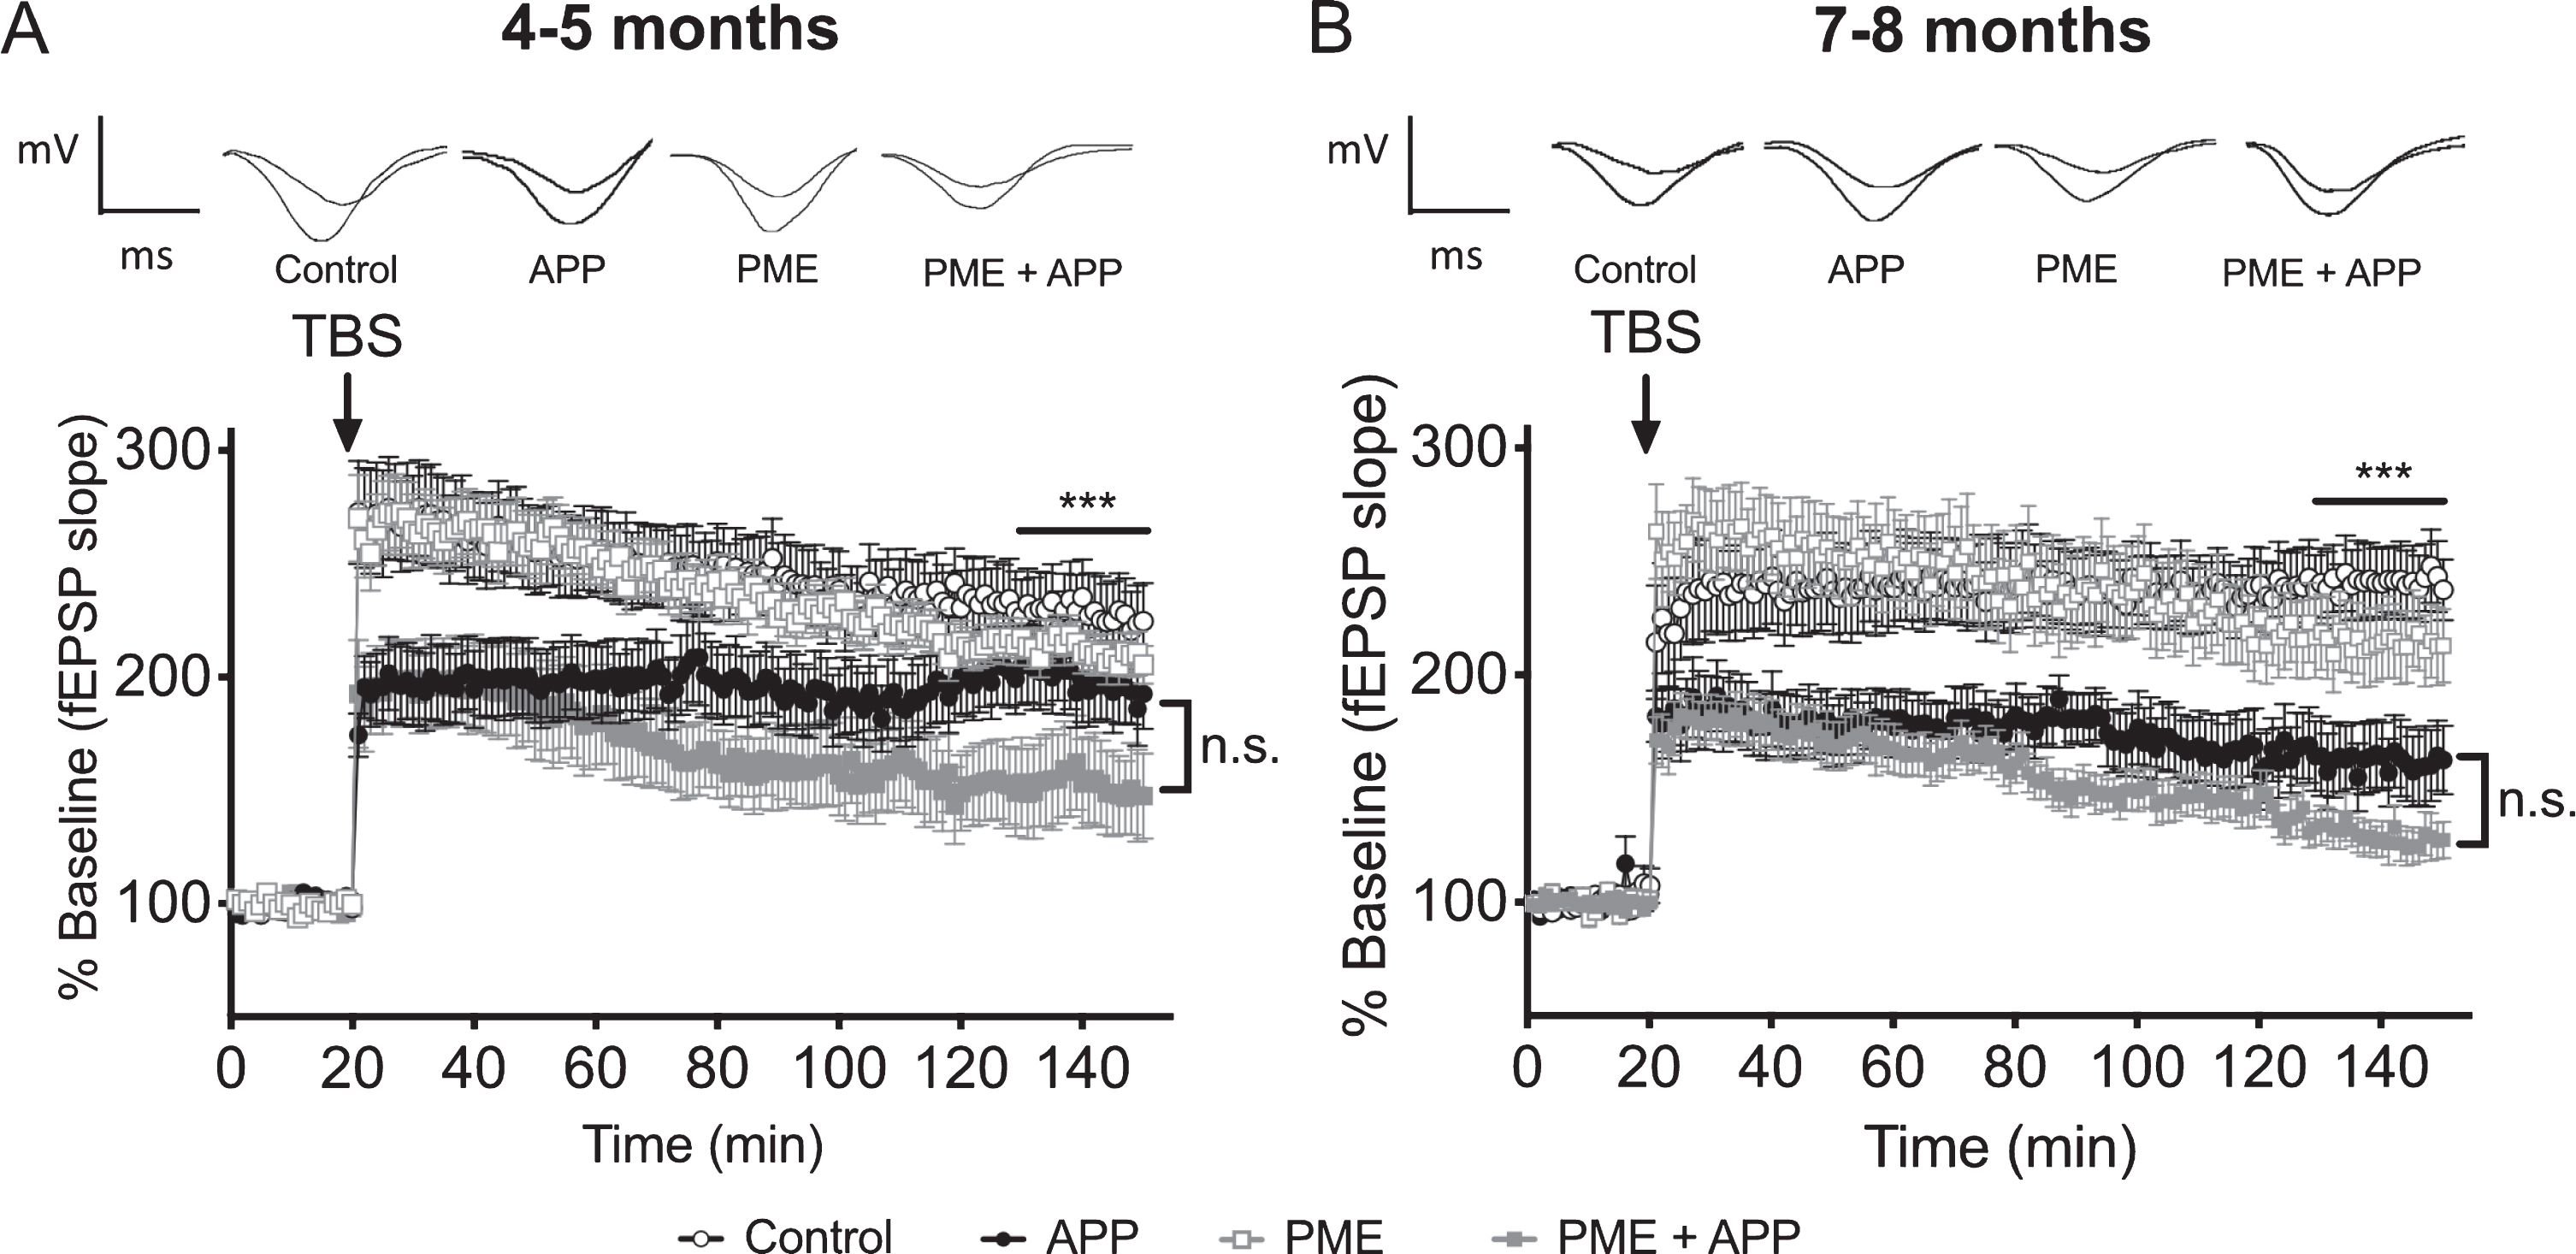 The effect of PME overexpression on LTP impairments in Tg2576 mice. A) Time course of averaged Schaffer collateral fEPSP responses (±SEM) prior to and following delivery of theta-burst stimulation (arrow) in hippocampal slices prepared from 4-5-month-old mice that carried the Tg2576 APP transgene in combination with transgenic PME overexpression (PME + APP), or 4-5-month-old animals that carried the Tg2576 APP transgene alone (APP), overexpressed PME alone (PME), or controls. 2-way RM ANOVA for fEPSP responses over the last 20 min of recording with group and time as factors shows a significant effect of group (horizontal bar; F(3,65) = 4.717, p = 0.0049), however, the trend for increased impairment in the PME + APP group relative to the APP alone group was not statistically significant (Dunnett’s multiple comparisons p = 0.1165). N = 17 control, 13 APP, 24 PME, 15 PME + APP. Representative traces of field potential responses prior to TBS, and during the last 20 min of recording are shown above for each of the indicated genotypes. B) Time course of averaged Schaffer collateral fEPSP responses (±SEM) prior to and following delivery of theta-burst stimulation (arrow) in hippocampal slices prepared from 7-8-month-old mice that carried the Tg2576 APP transgene in combination with transgenic PME overexpression (PME + APP), or 7-8-month-old animals that carried the Tg2576 APP transgene alone (APP), overexpressed PME alone (PME), or controls. 2-way RM ANOVA for fEPSP responses over the last 20 min of recording with group and time as factors shows a significant effect of group (horizontal bar; F(3,45) = 15.17, p < 0.0001); however, the trend for increased impairment in the PME + APP group relative to the APP alone group was not statistically significant (Dunnett’s multiple comparisons p = 0.2791). N = 11 control, 8 APP, 14 PME, 16 PME + APP. Representative traces of field potential responses prior to TBS, and during the last 20 min of recording are shown above for each of the indicated genotypes.